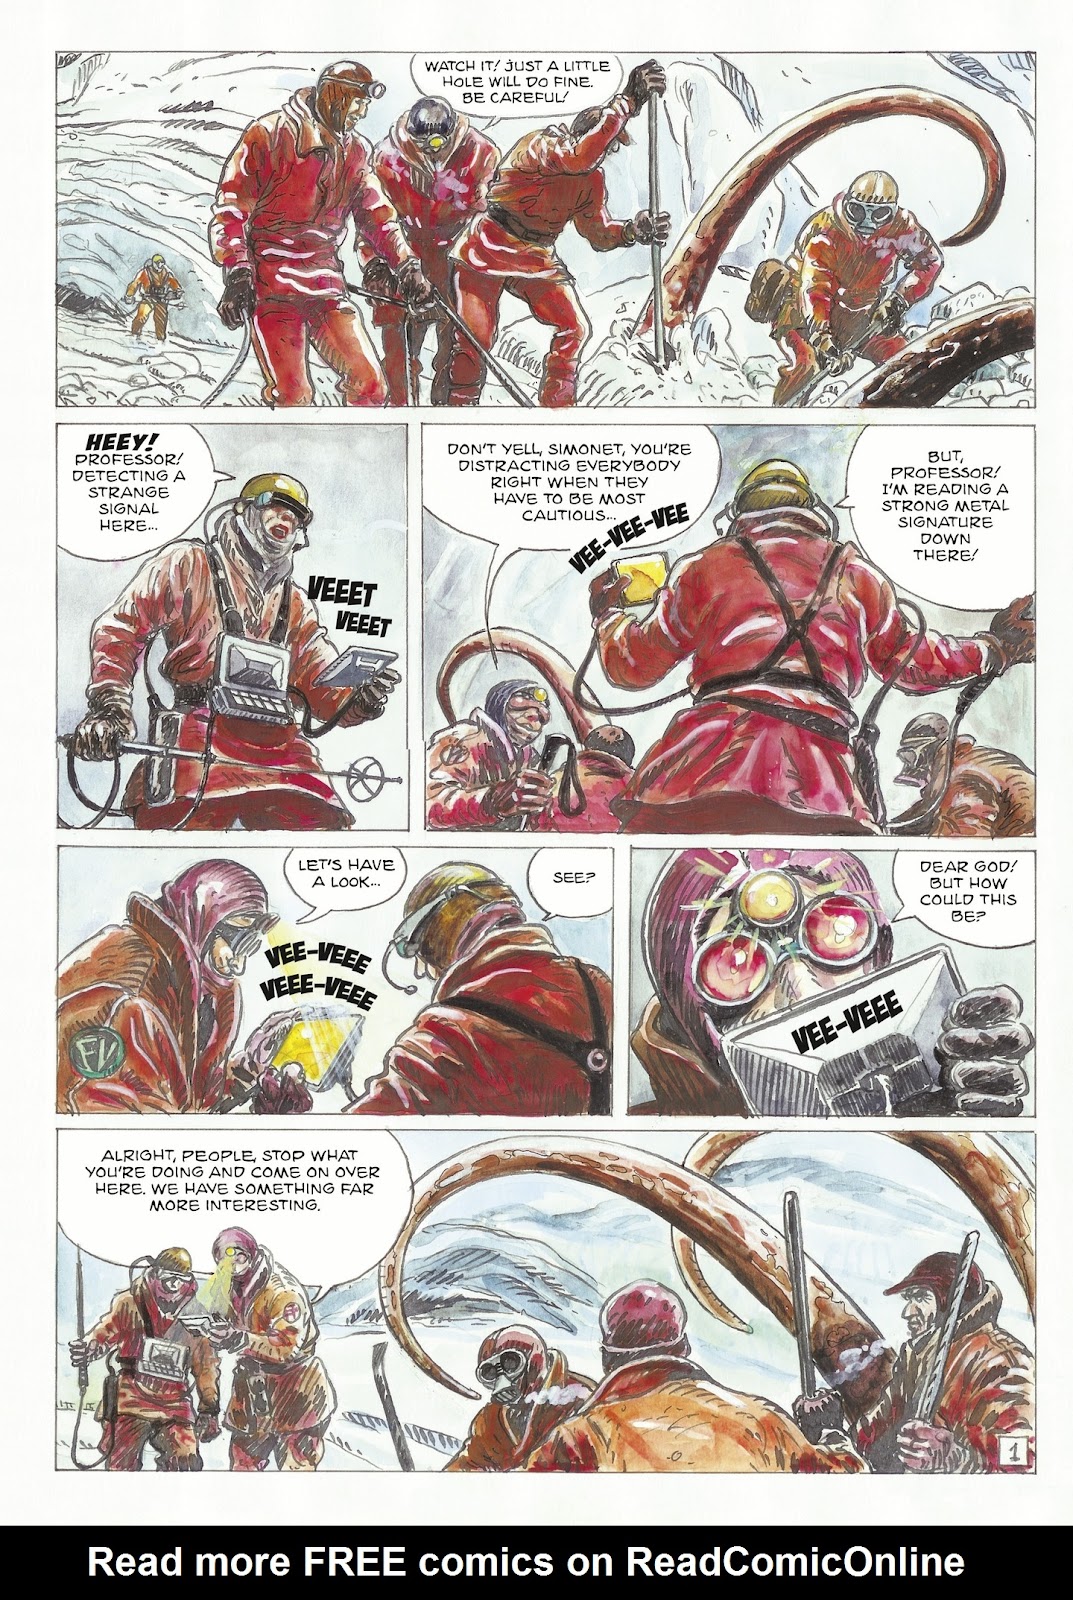 The Man With the Bear issue 1 - Page 3